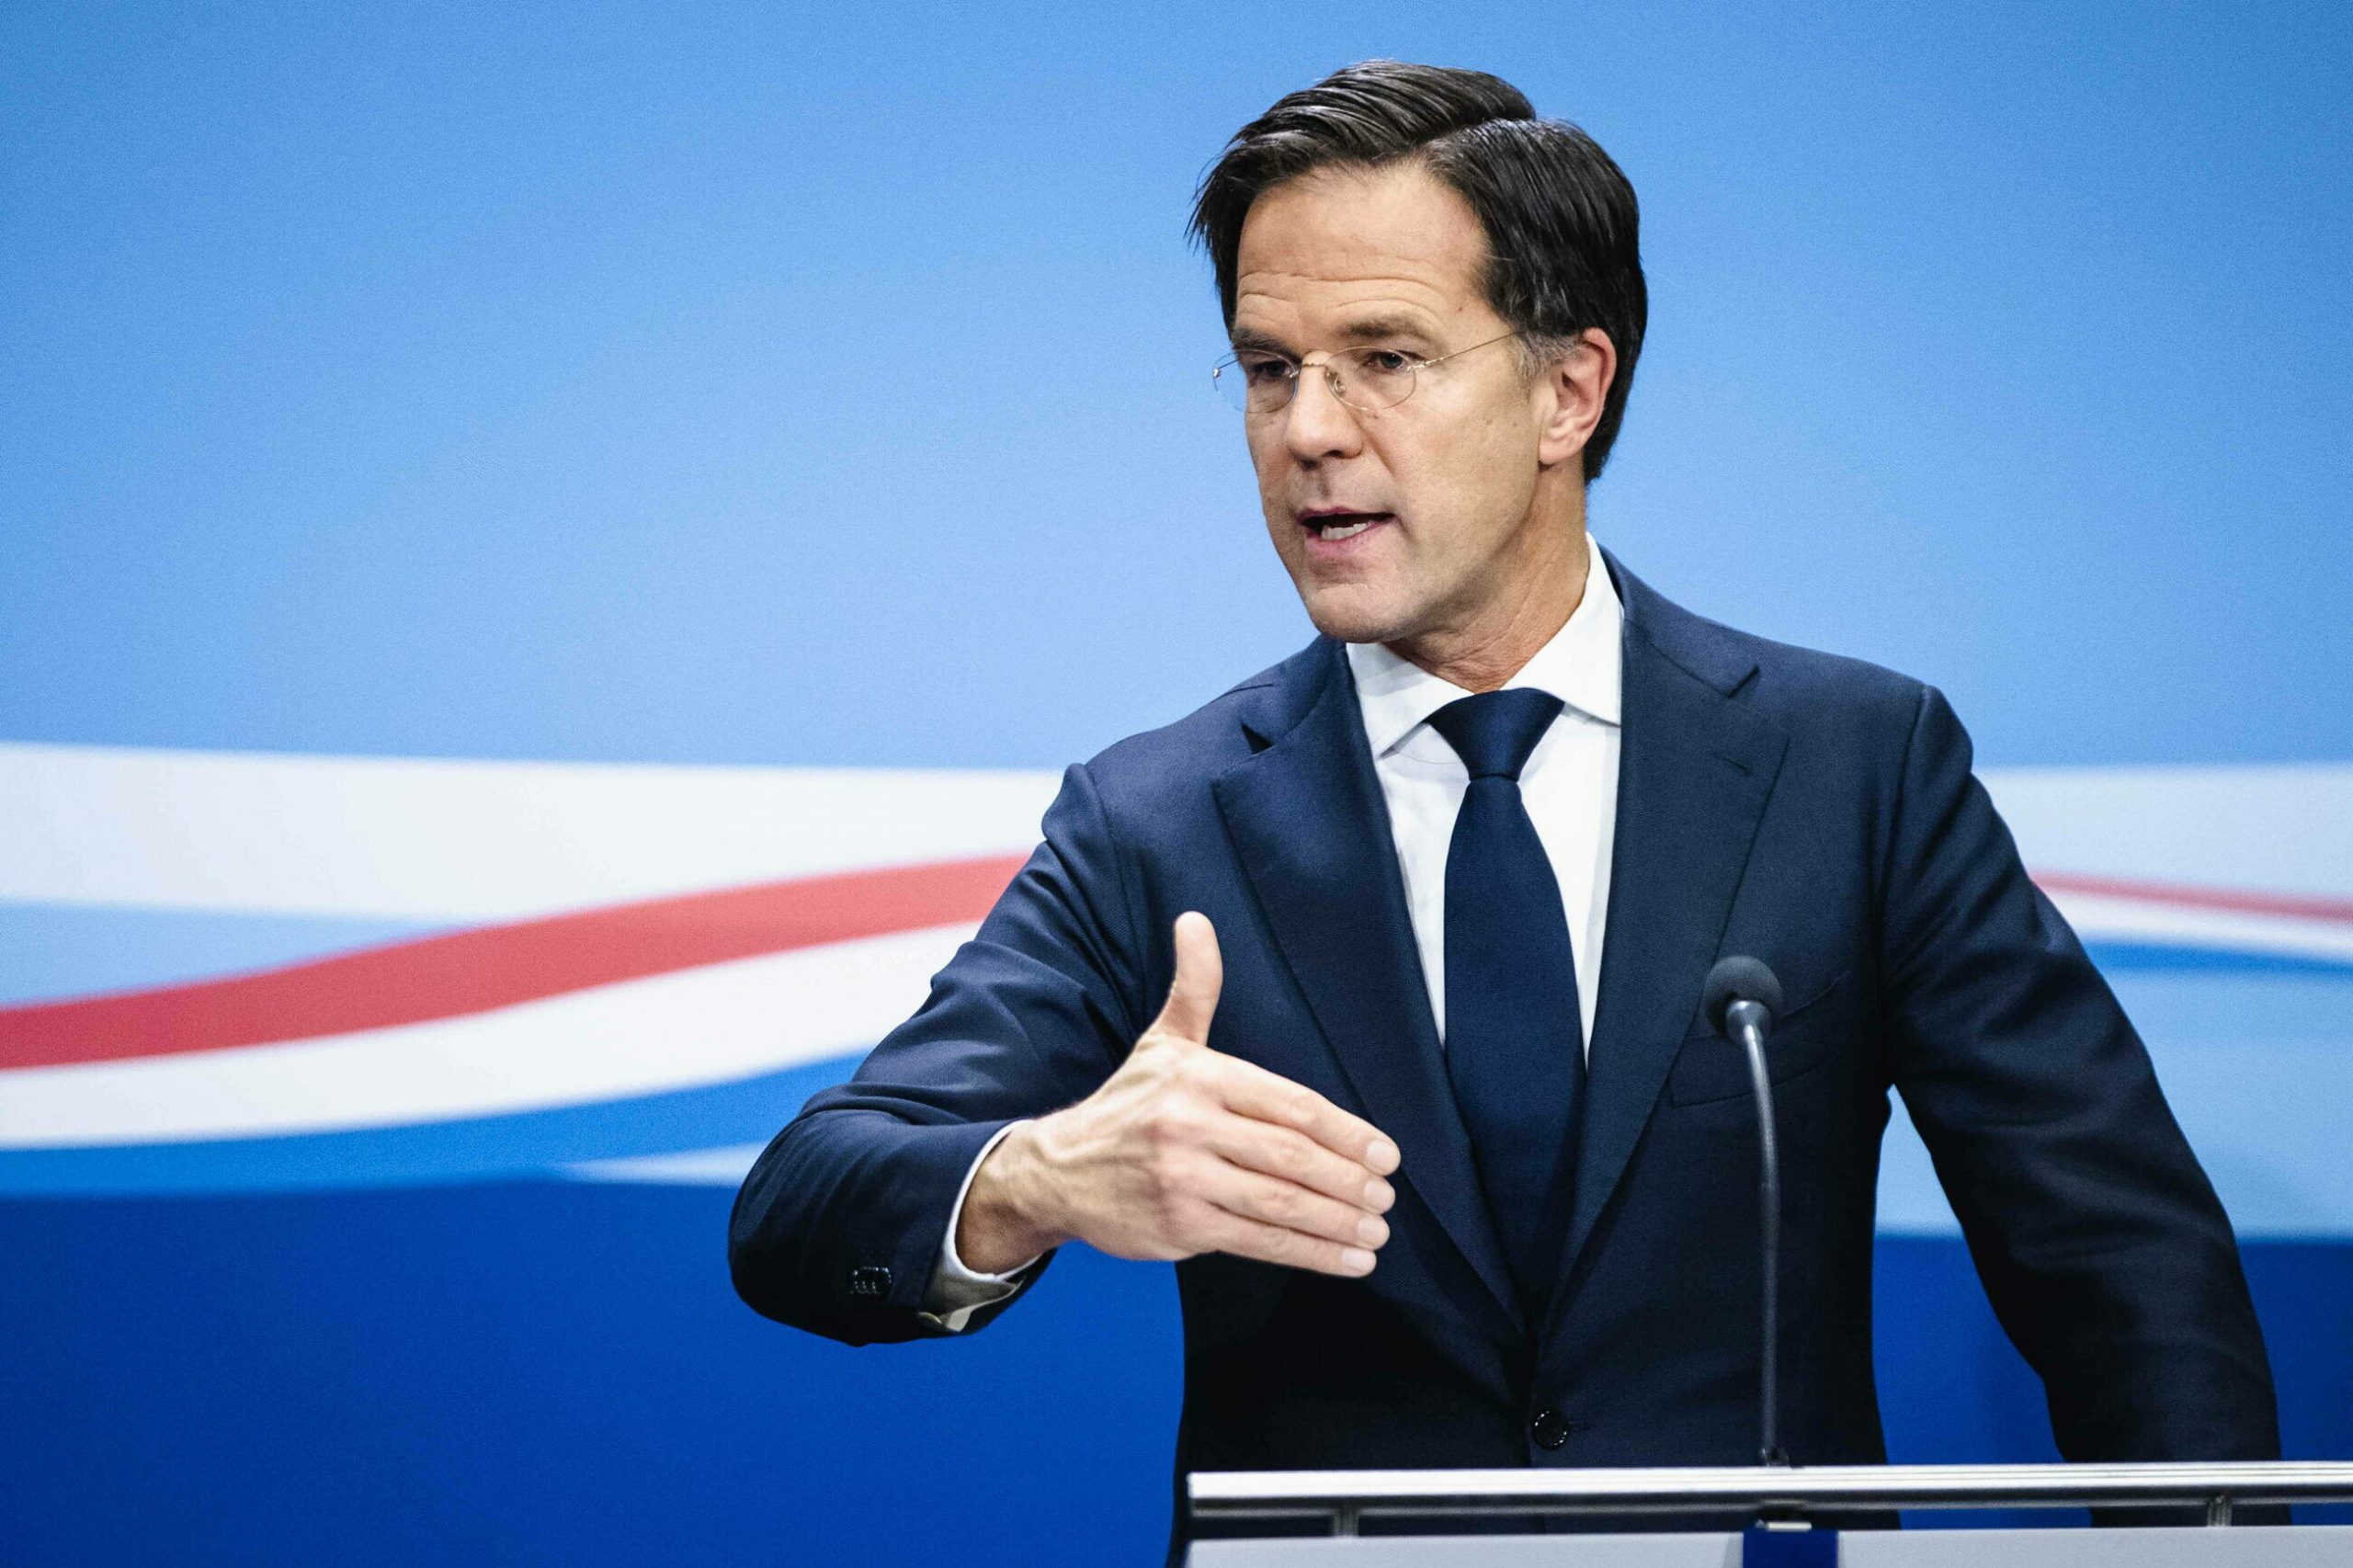 The Dutch government suspends financial aid to companies